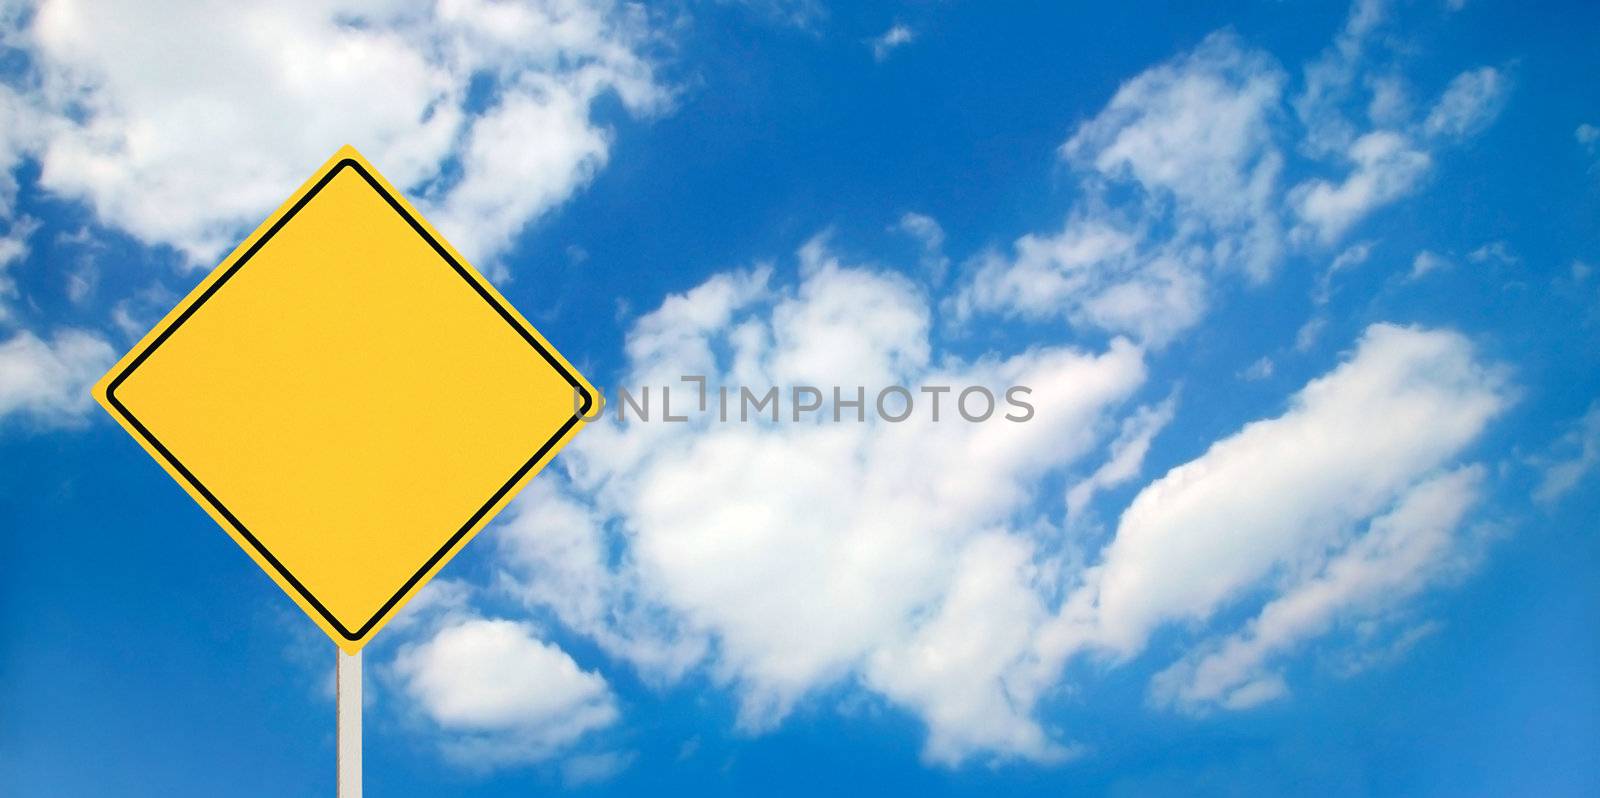 A blank yellow traffic sign ready for your text!